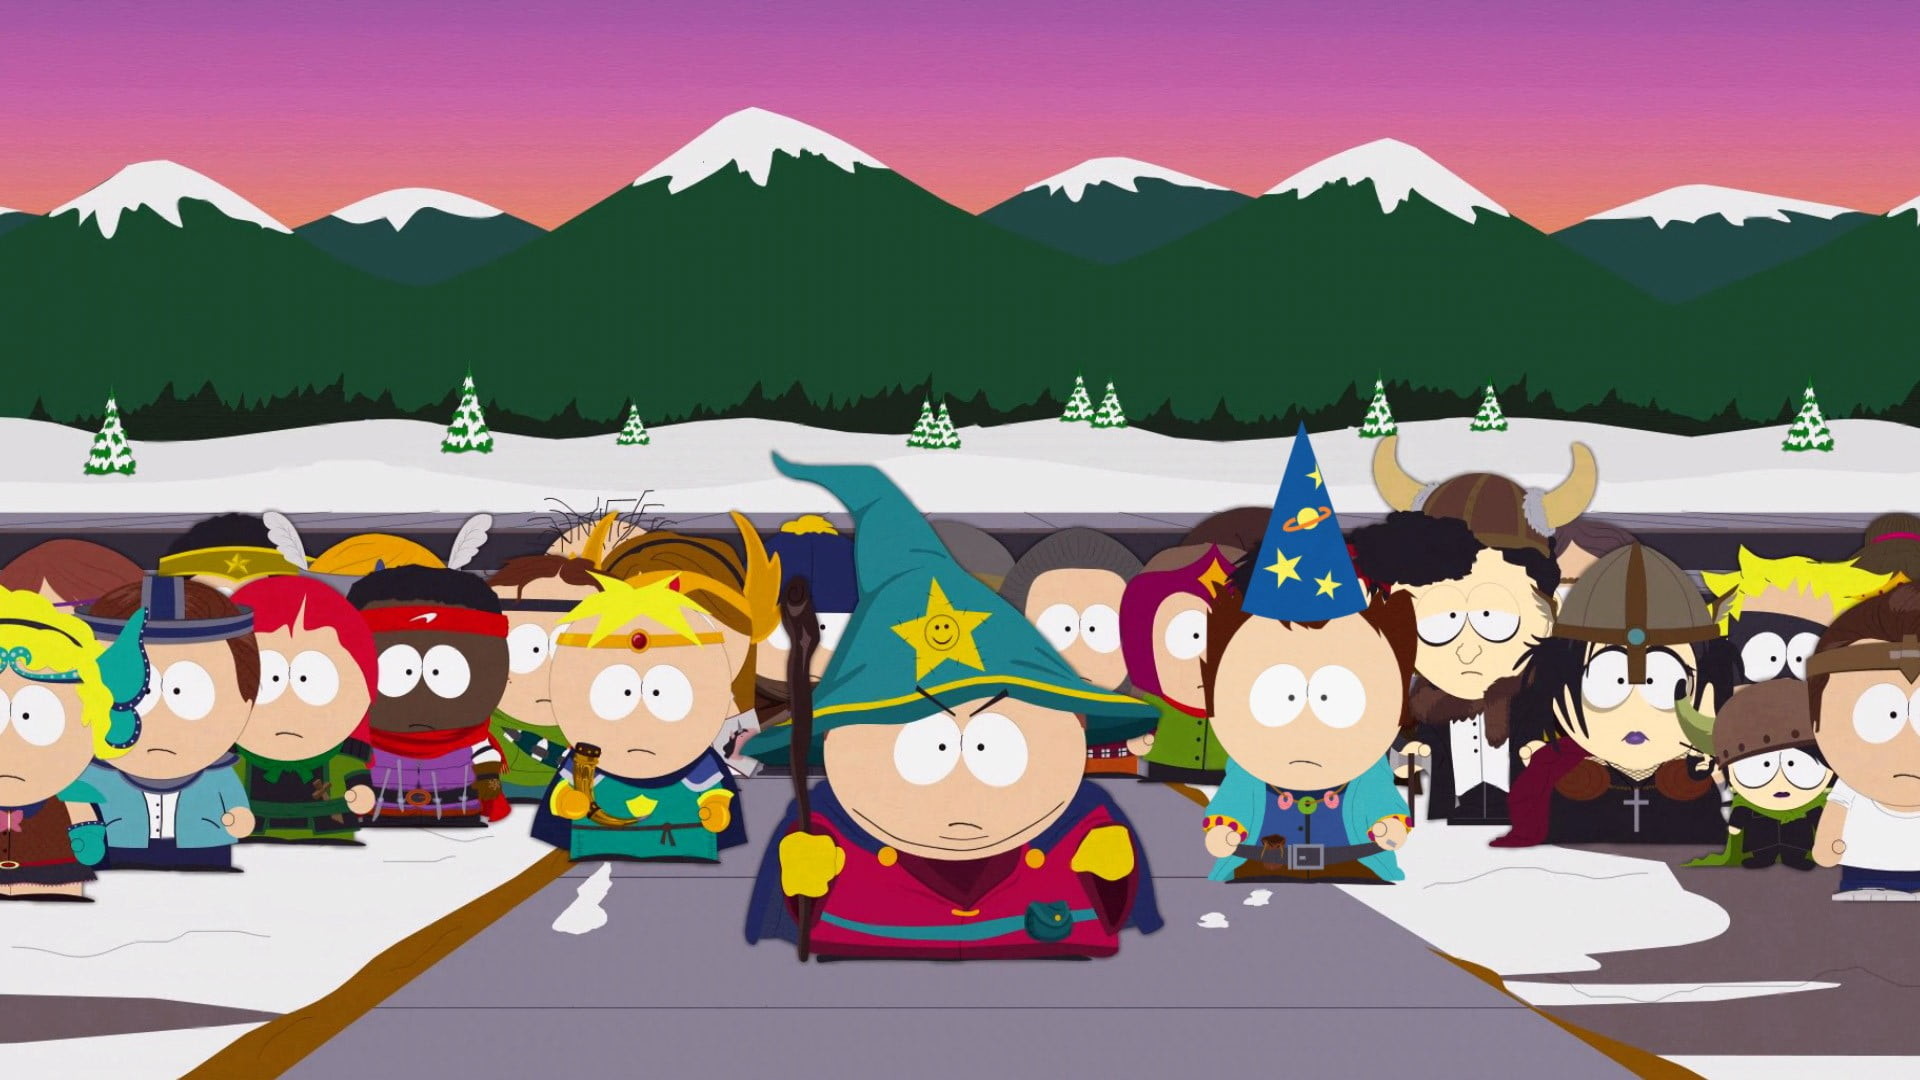 1920x1080 South Park wallpaper, South Park, South Park: The Stick Of Truth, Eric